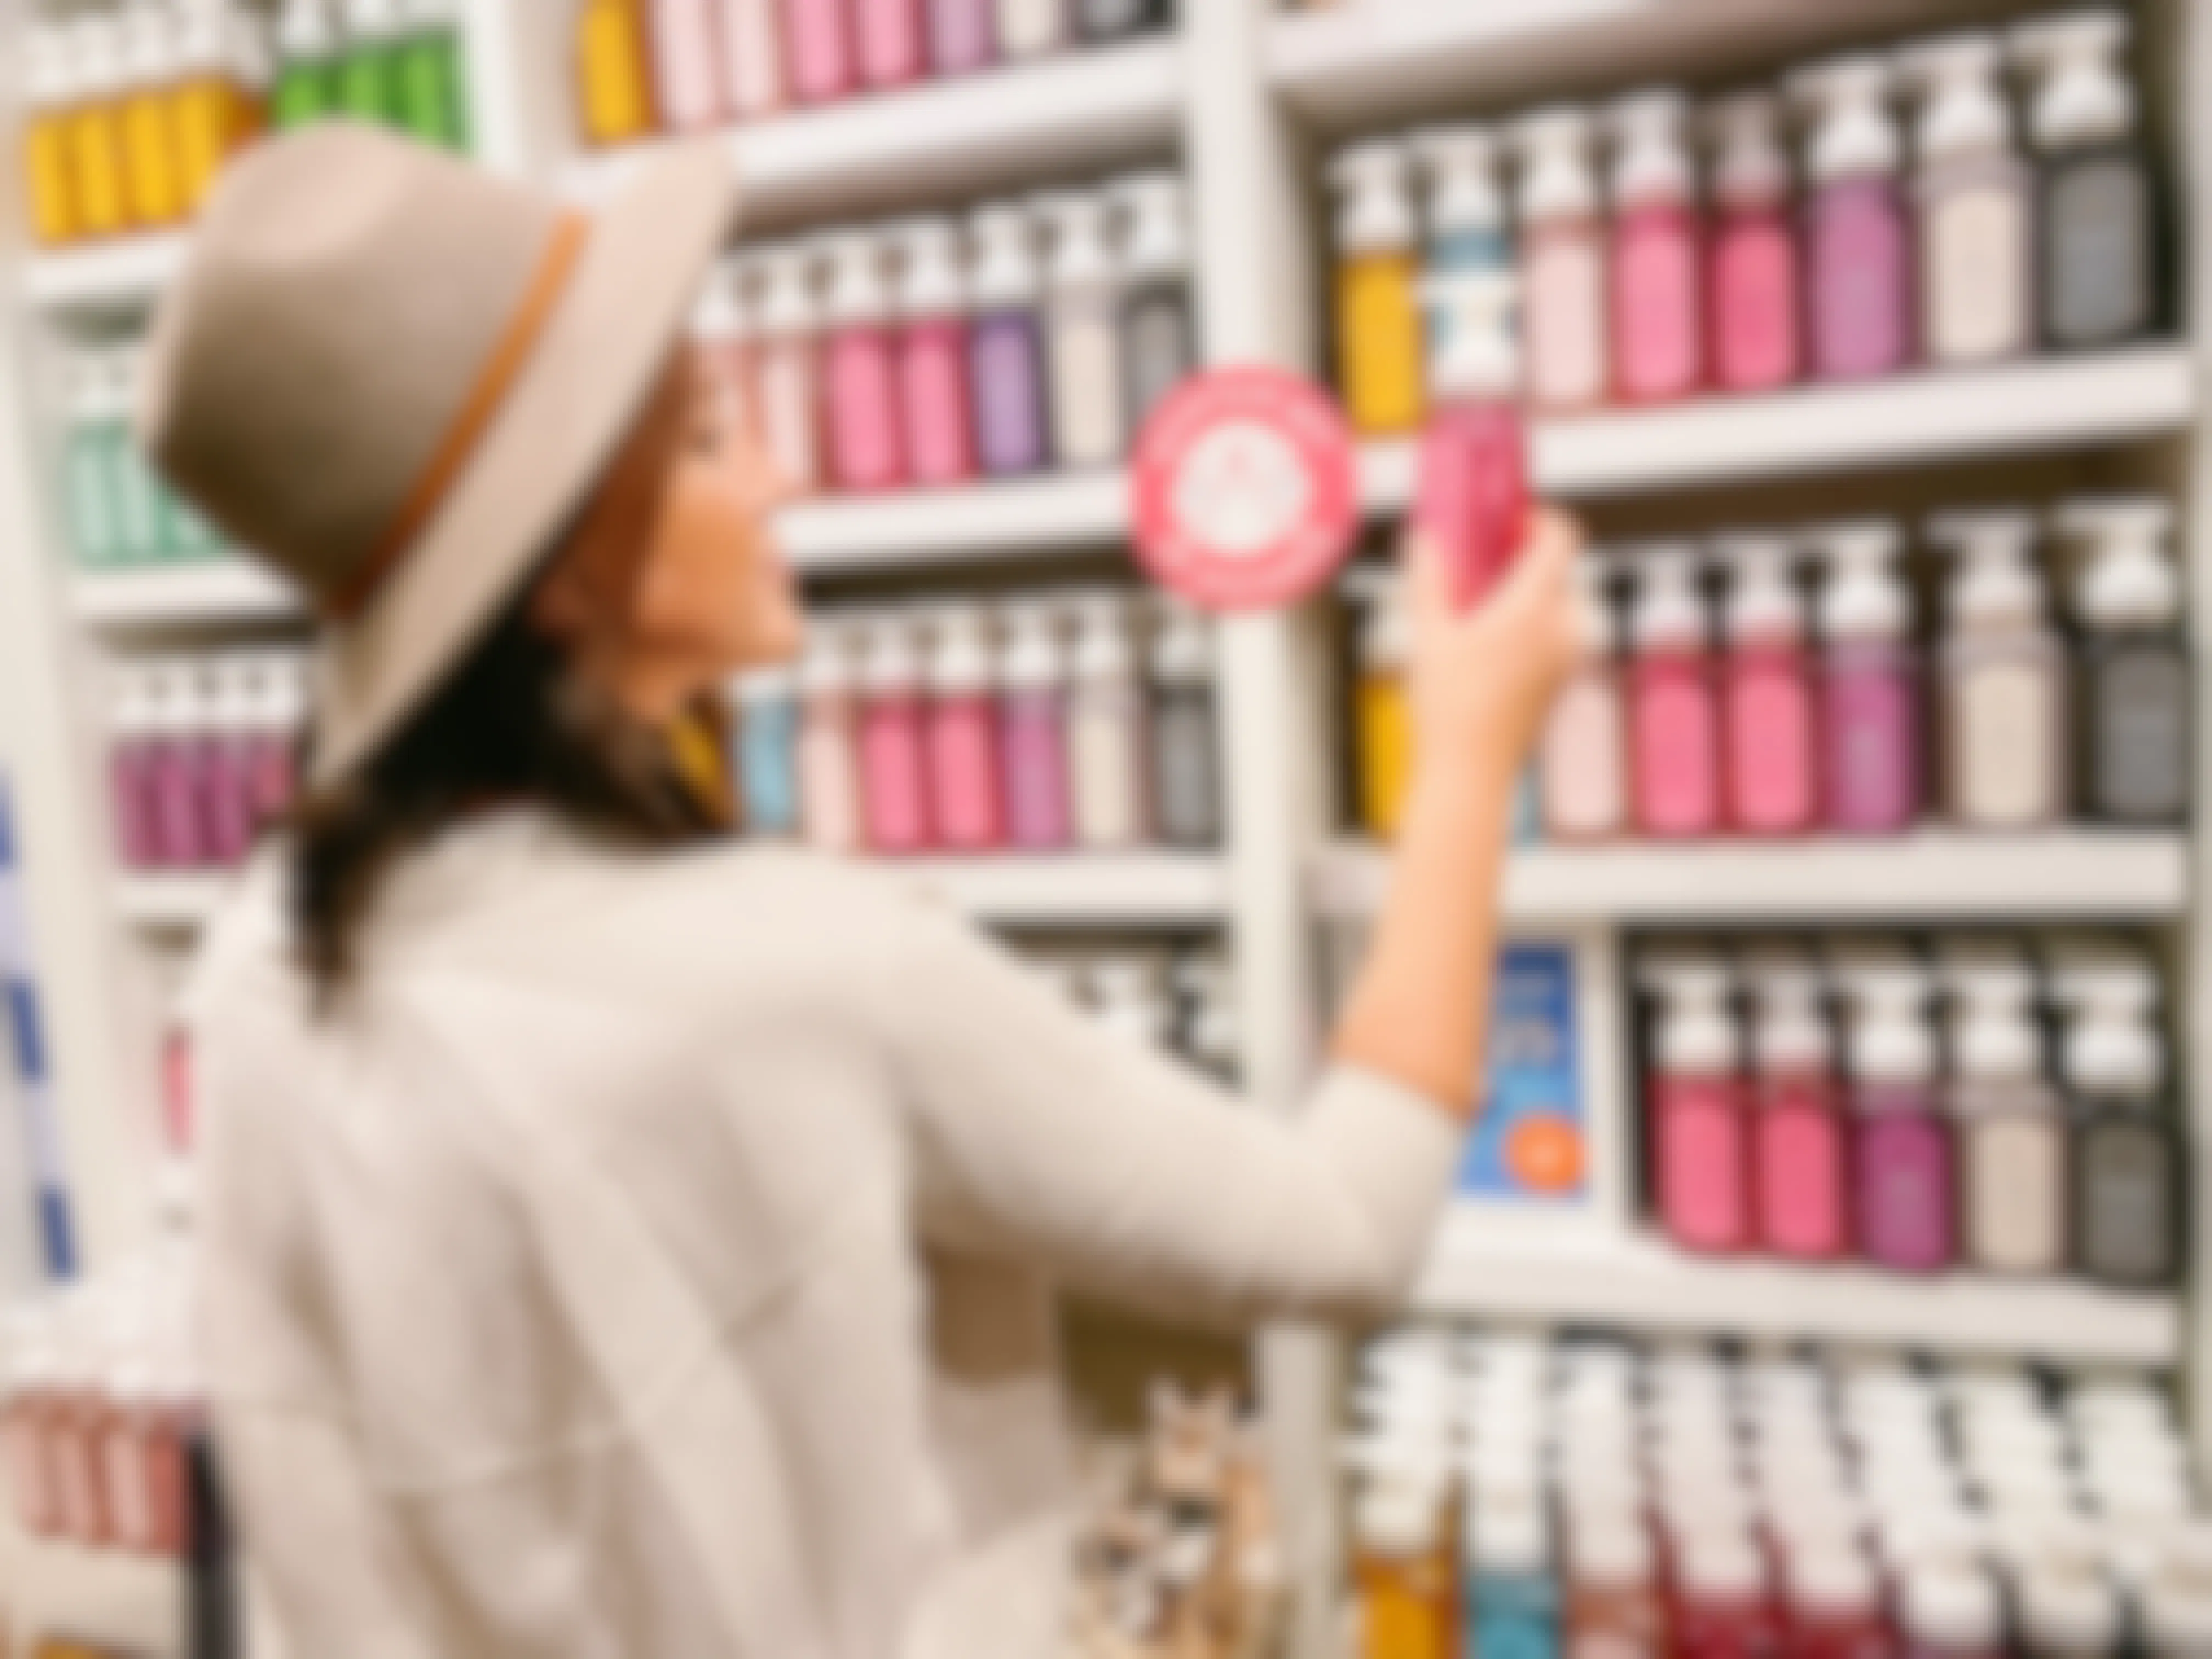 A woman standing in front of the wall display of hand soaps at Bath & Body Works, holding up a bottle of soap and looking at it.